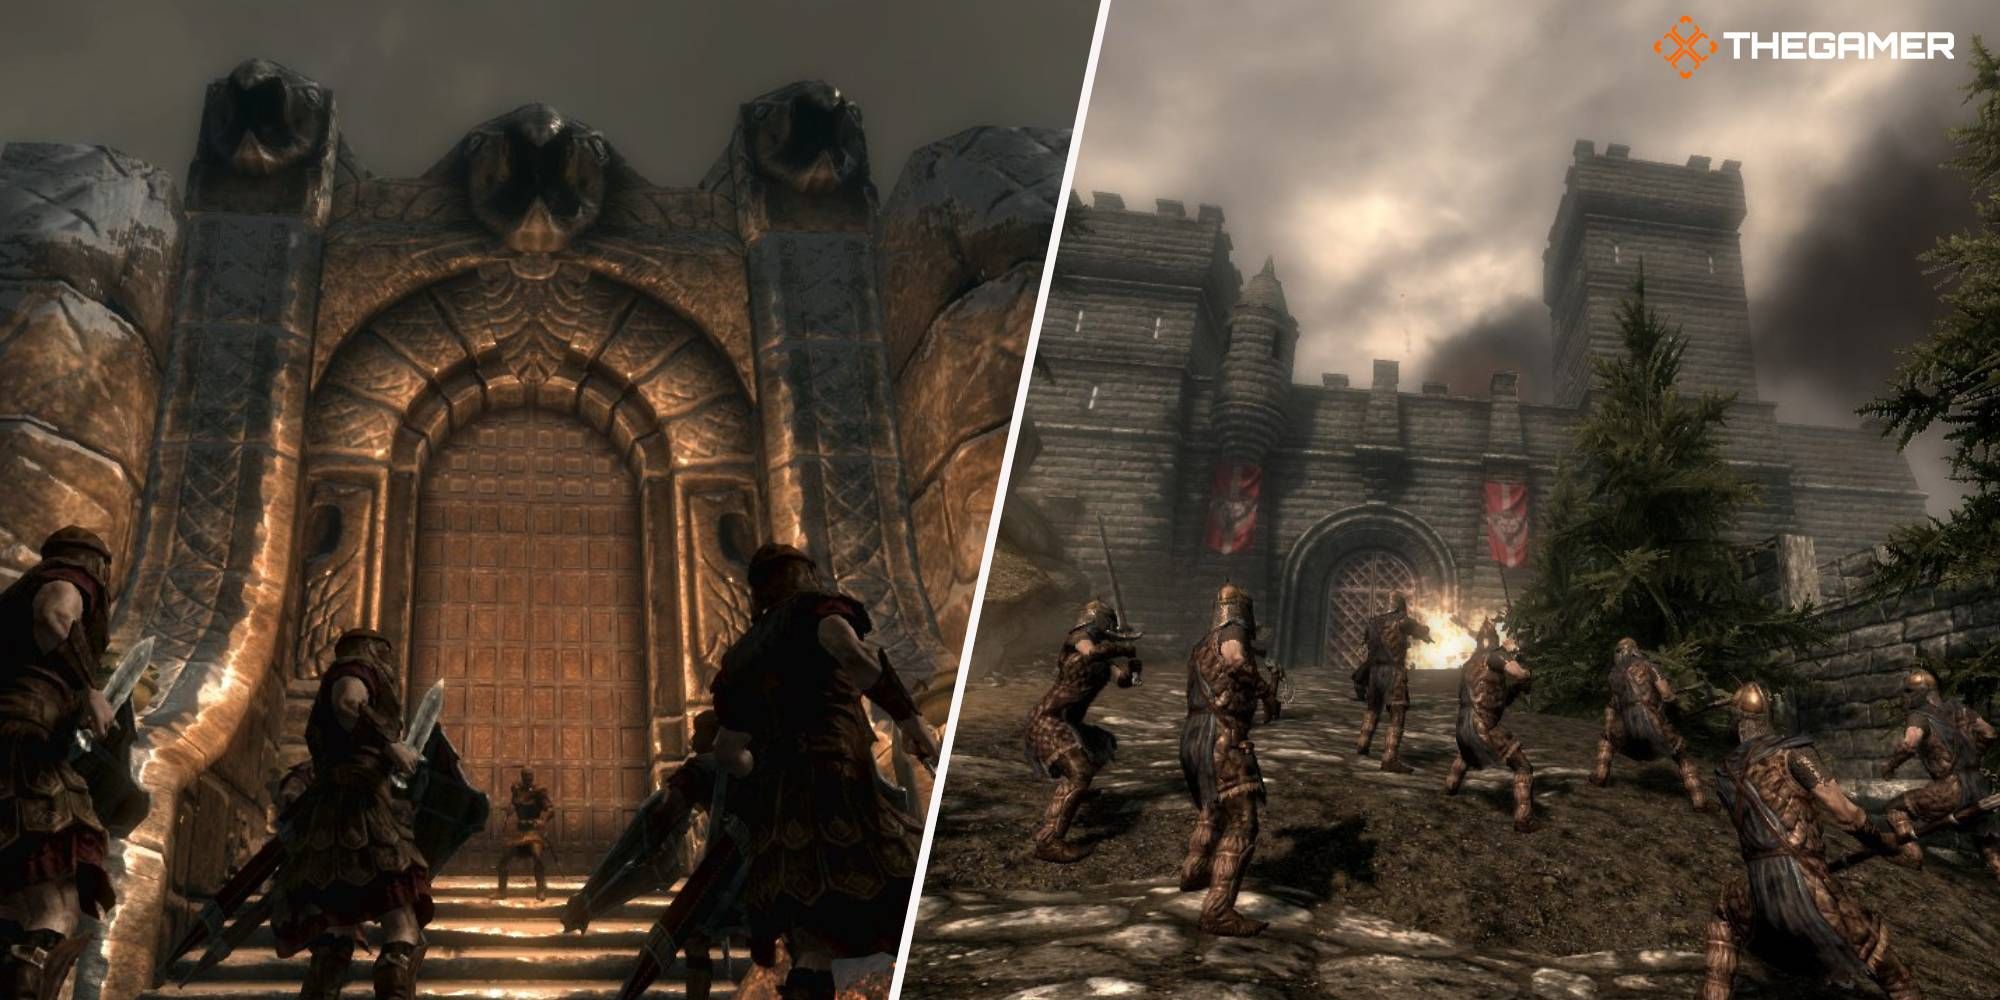 Storming Windhelm and Solitude in Skyrim